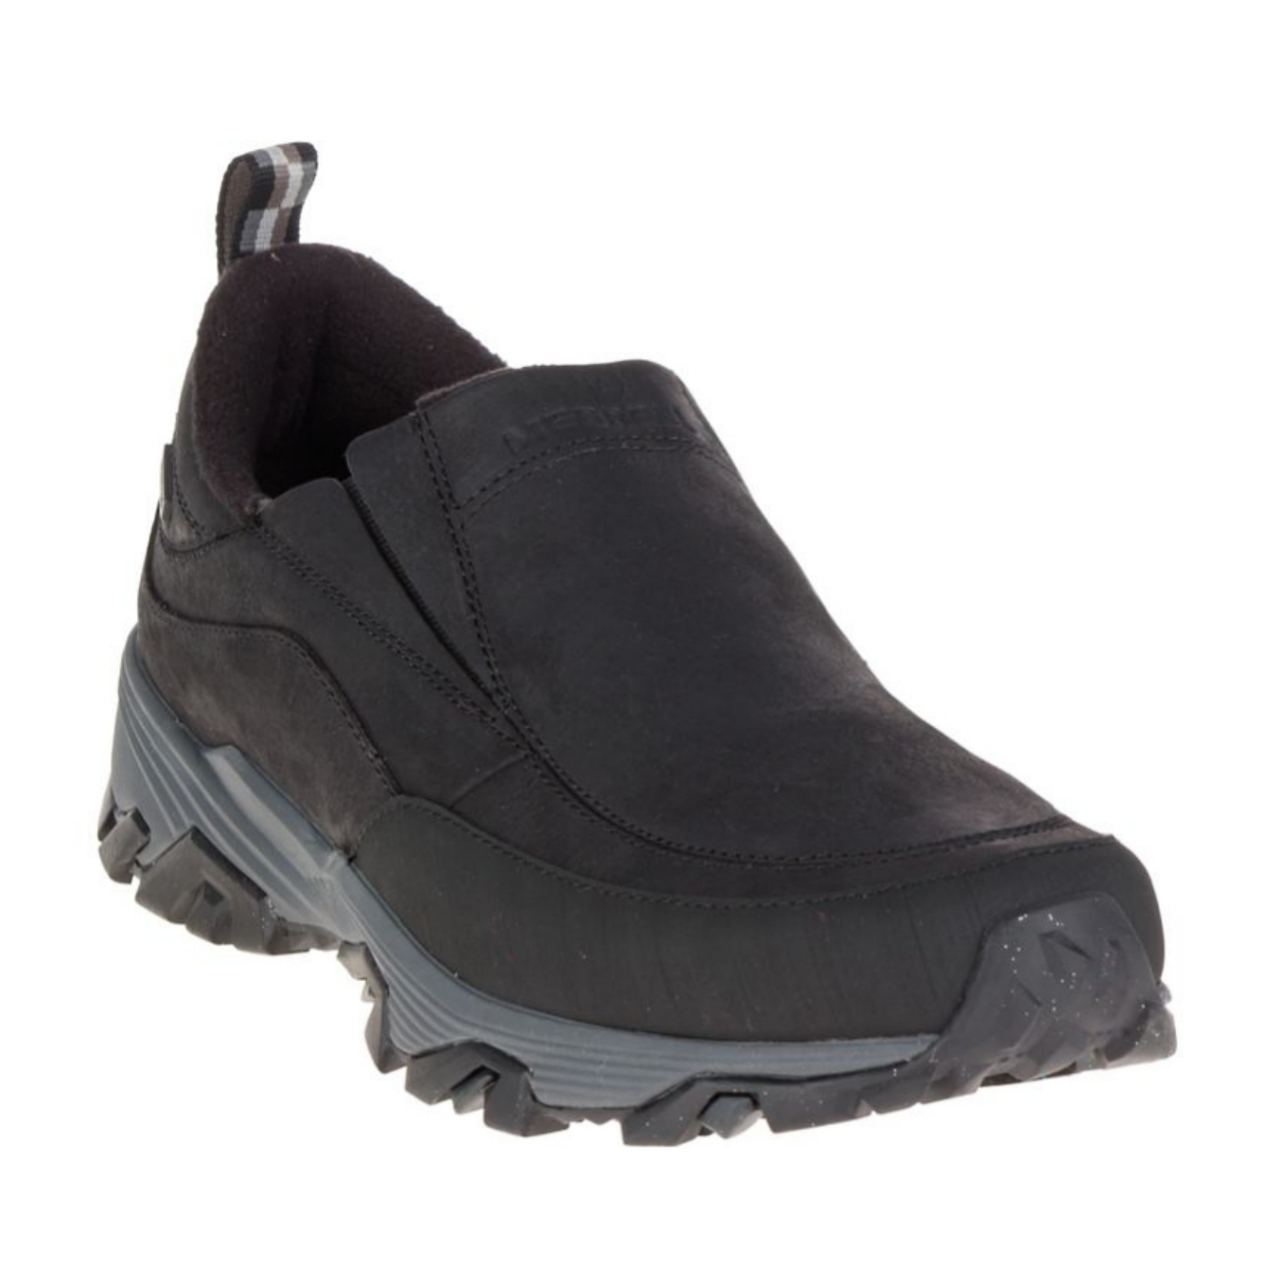 Merrell Men's Coldpack ICE+ Moc WP